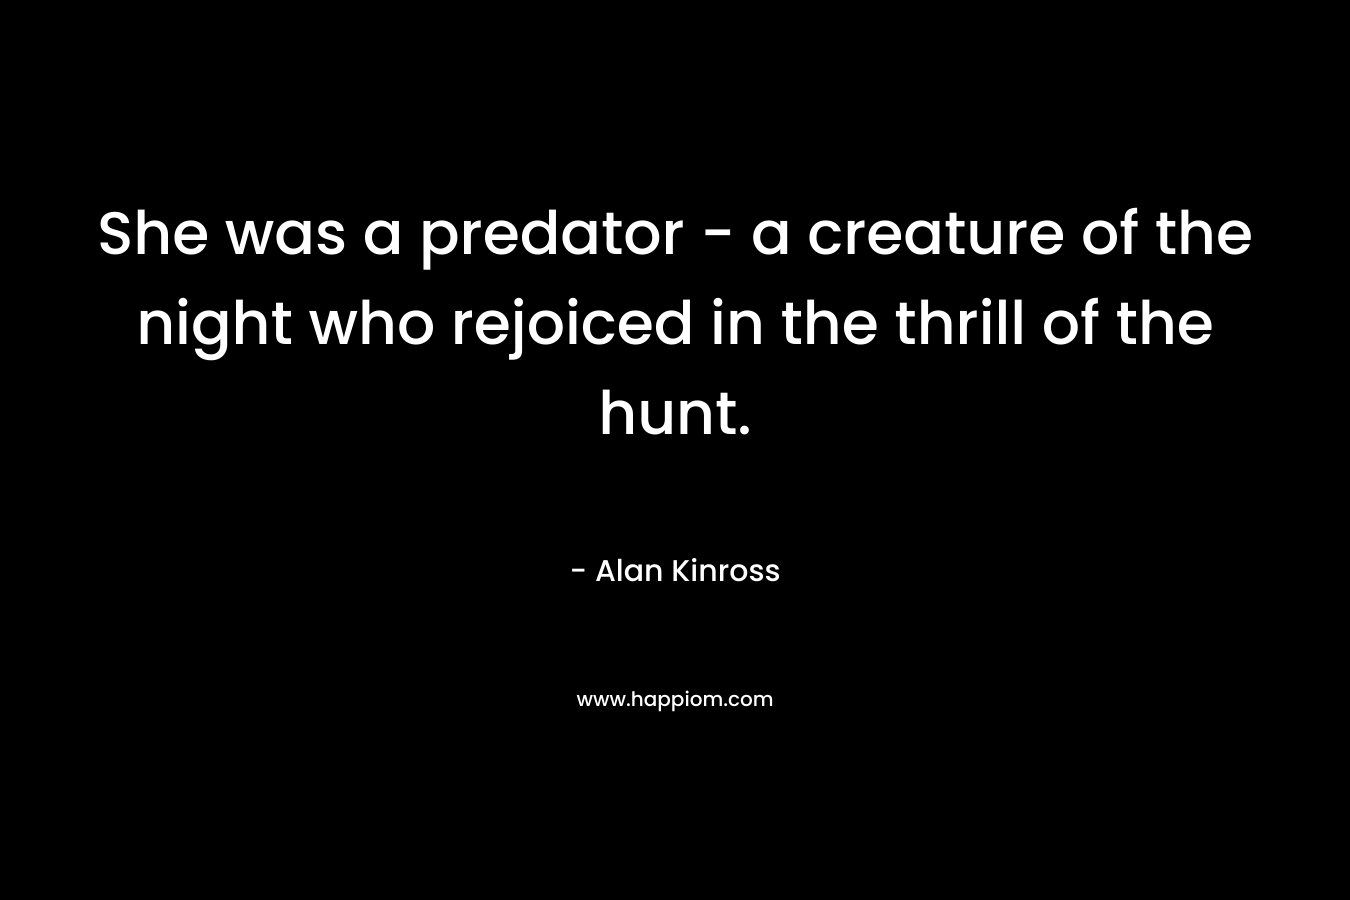 She was a predator – a creature of the night who rejoiced in the thrill of the hunt. – Alan Kinross